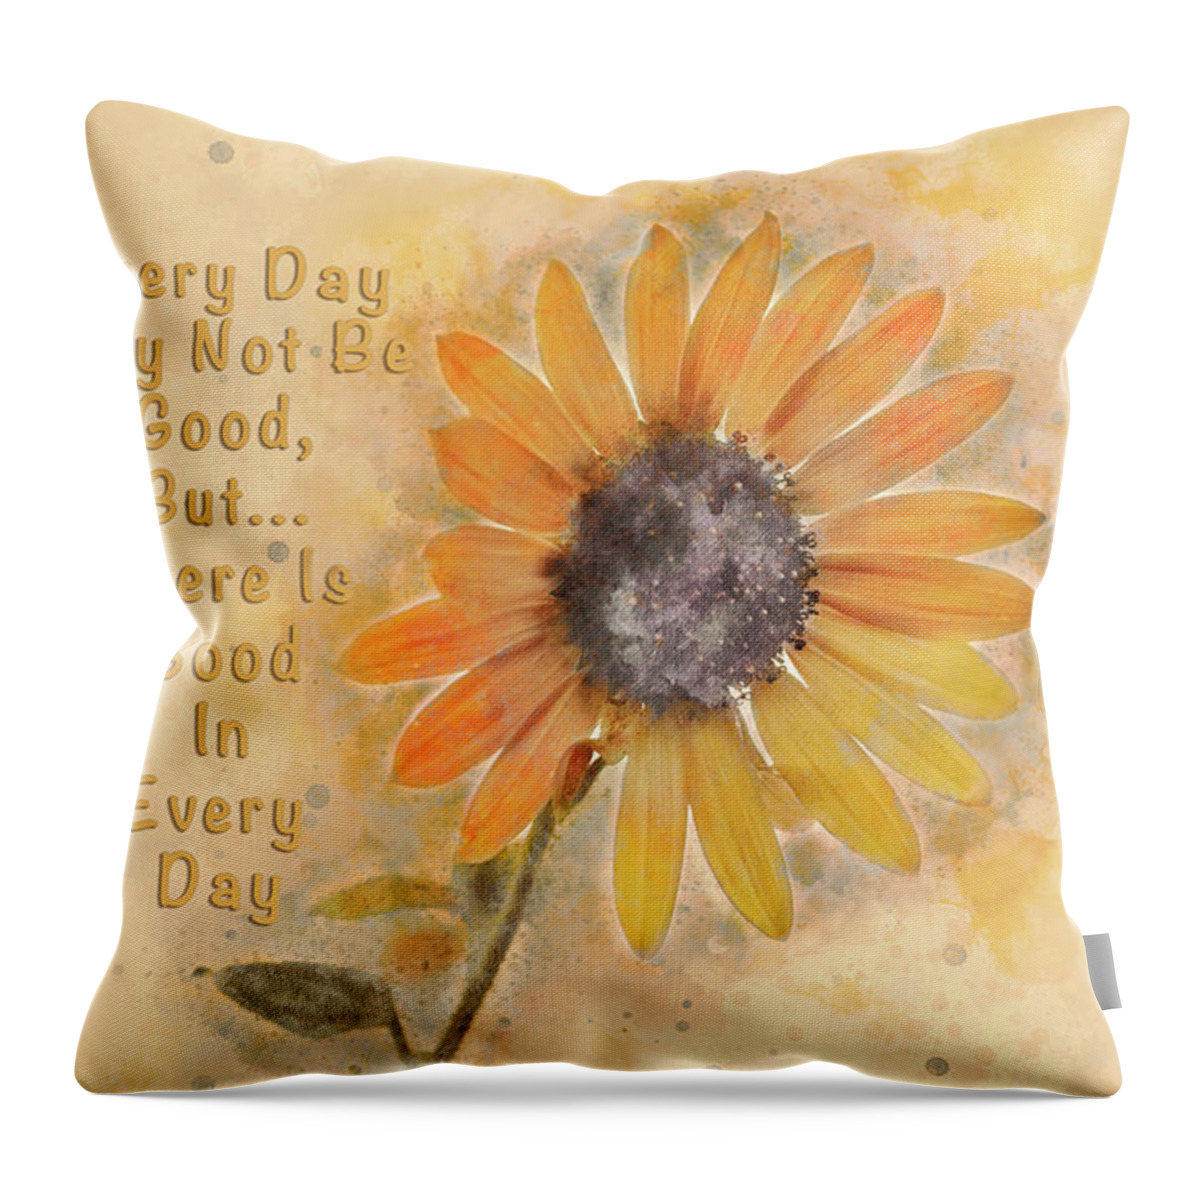 Sunflower Throw Pillow featuring the photograph Good In Every Day by Jennifer Grossnickle